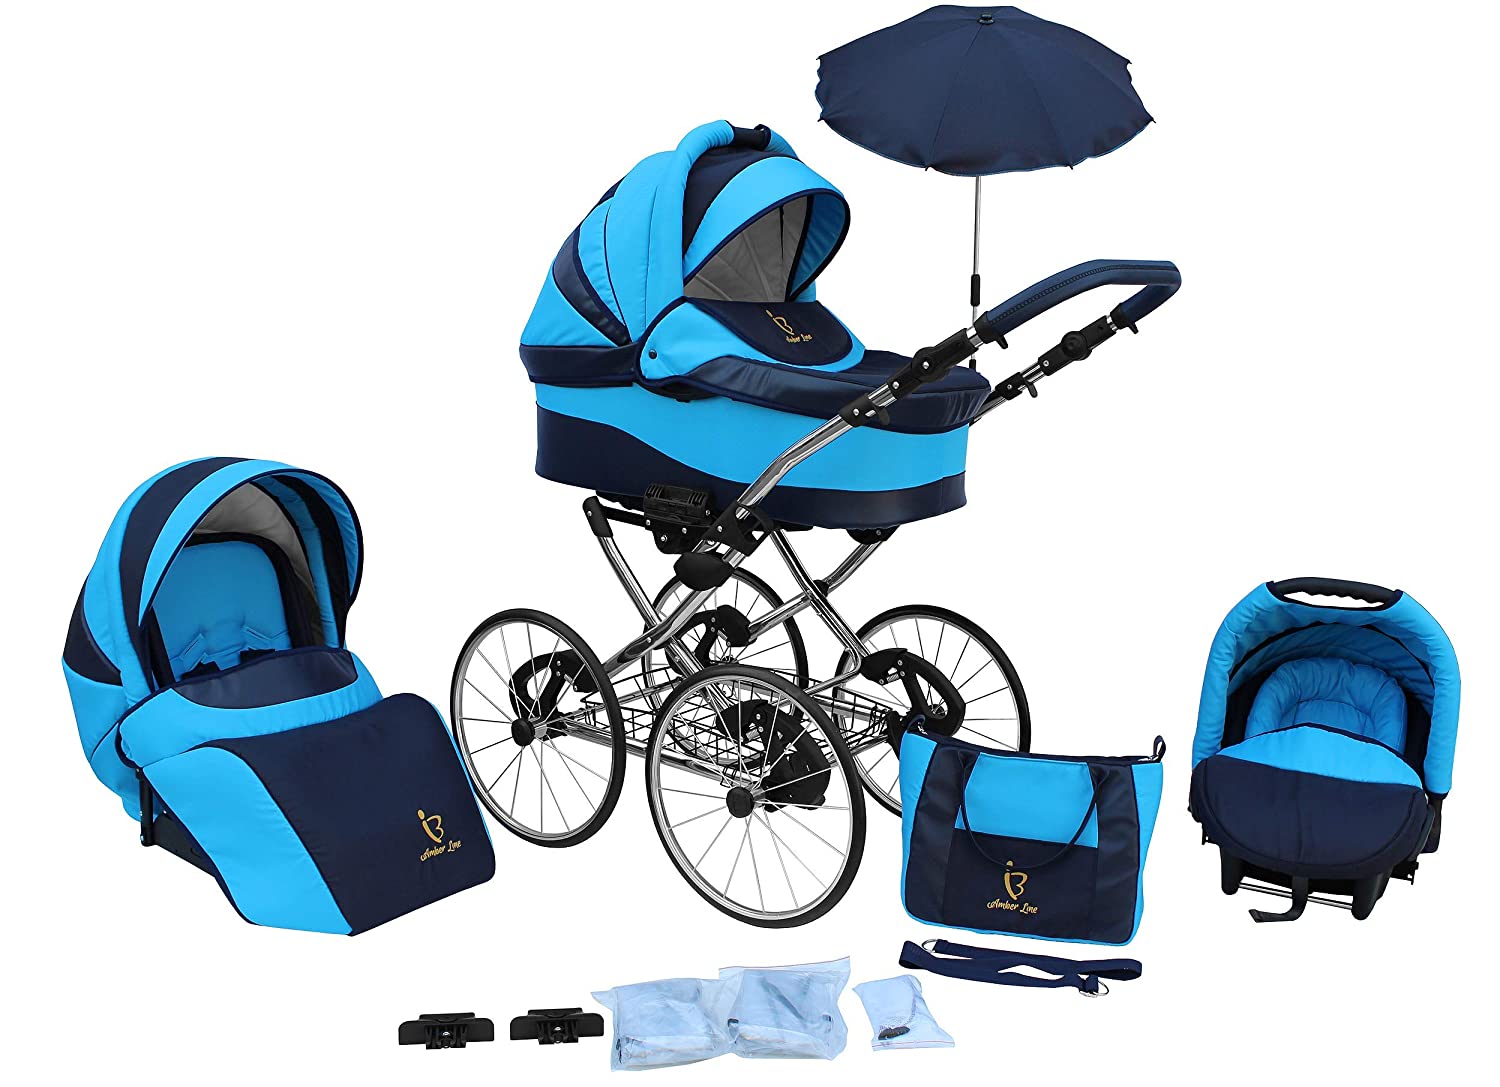 SKYLINE Classic Retro Style Combination Pram Buggy 3-in-1 Travel System Car Seat (Isofix) (Blue/17 Inch Hard Rubber Tyres)